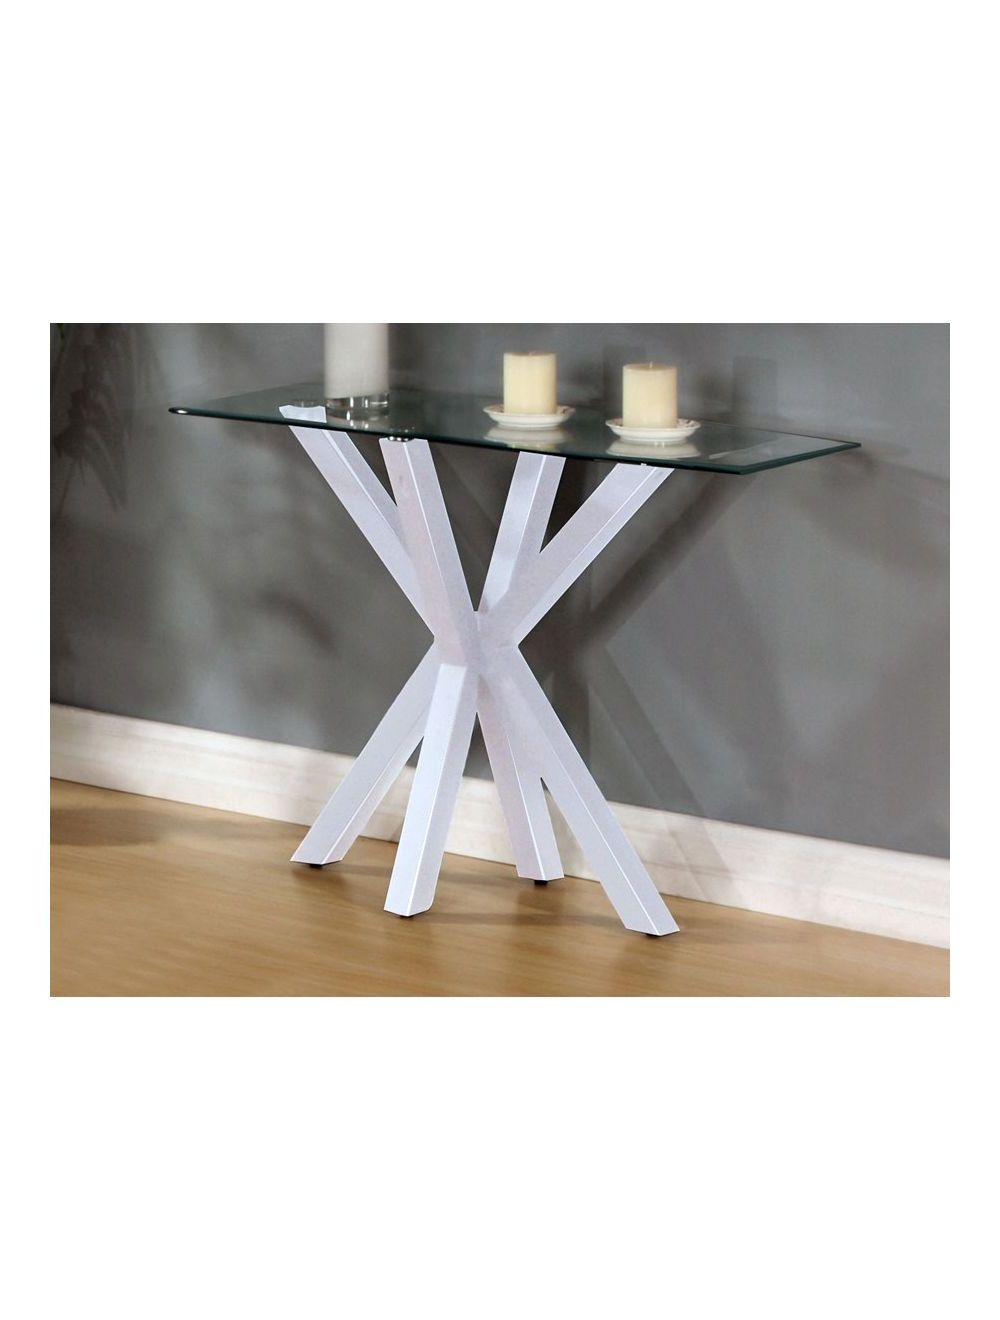 Langley High Gloss White Console Table Inside Most Up To Date White Gloss And Maple Cream Console Tables (View 10 of 10)